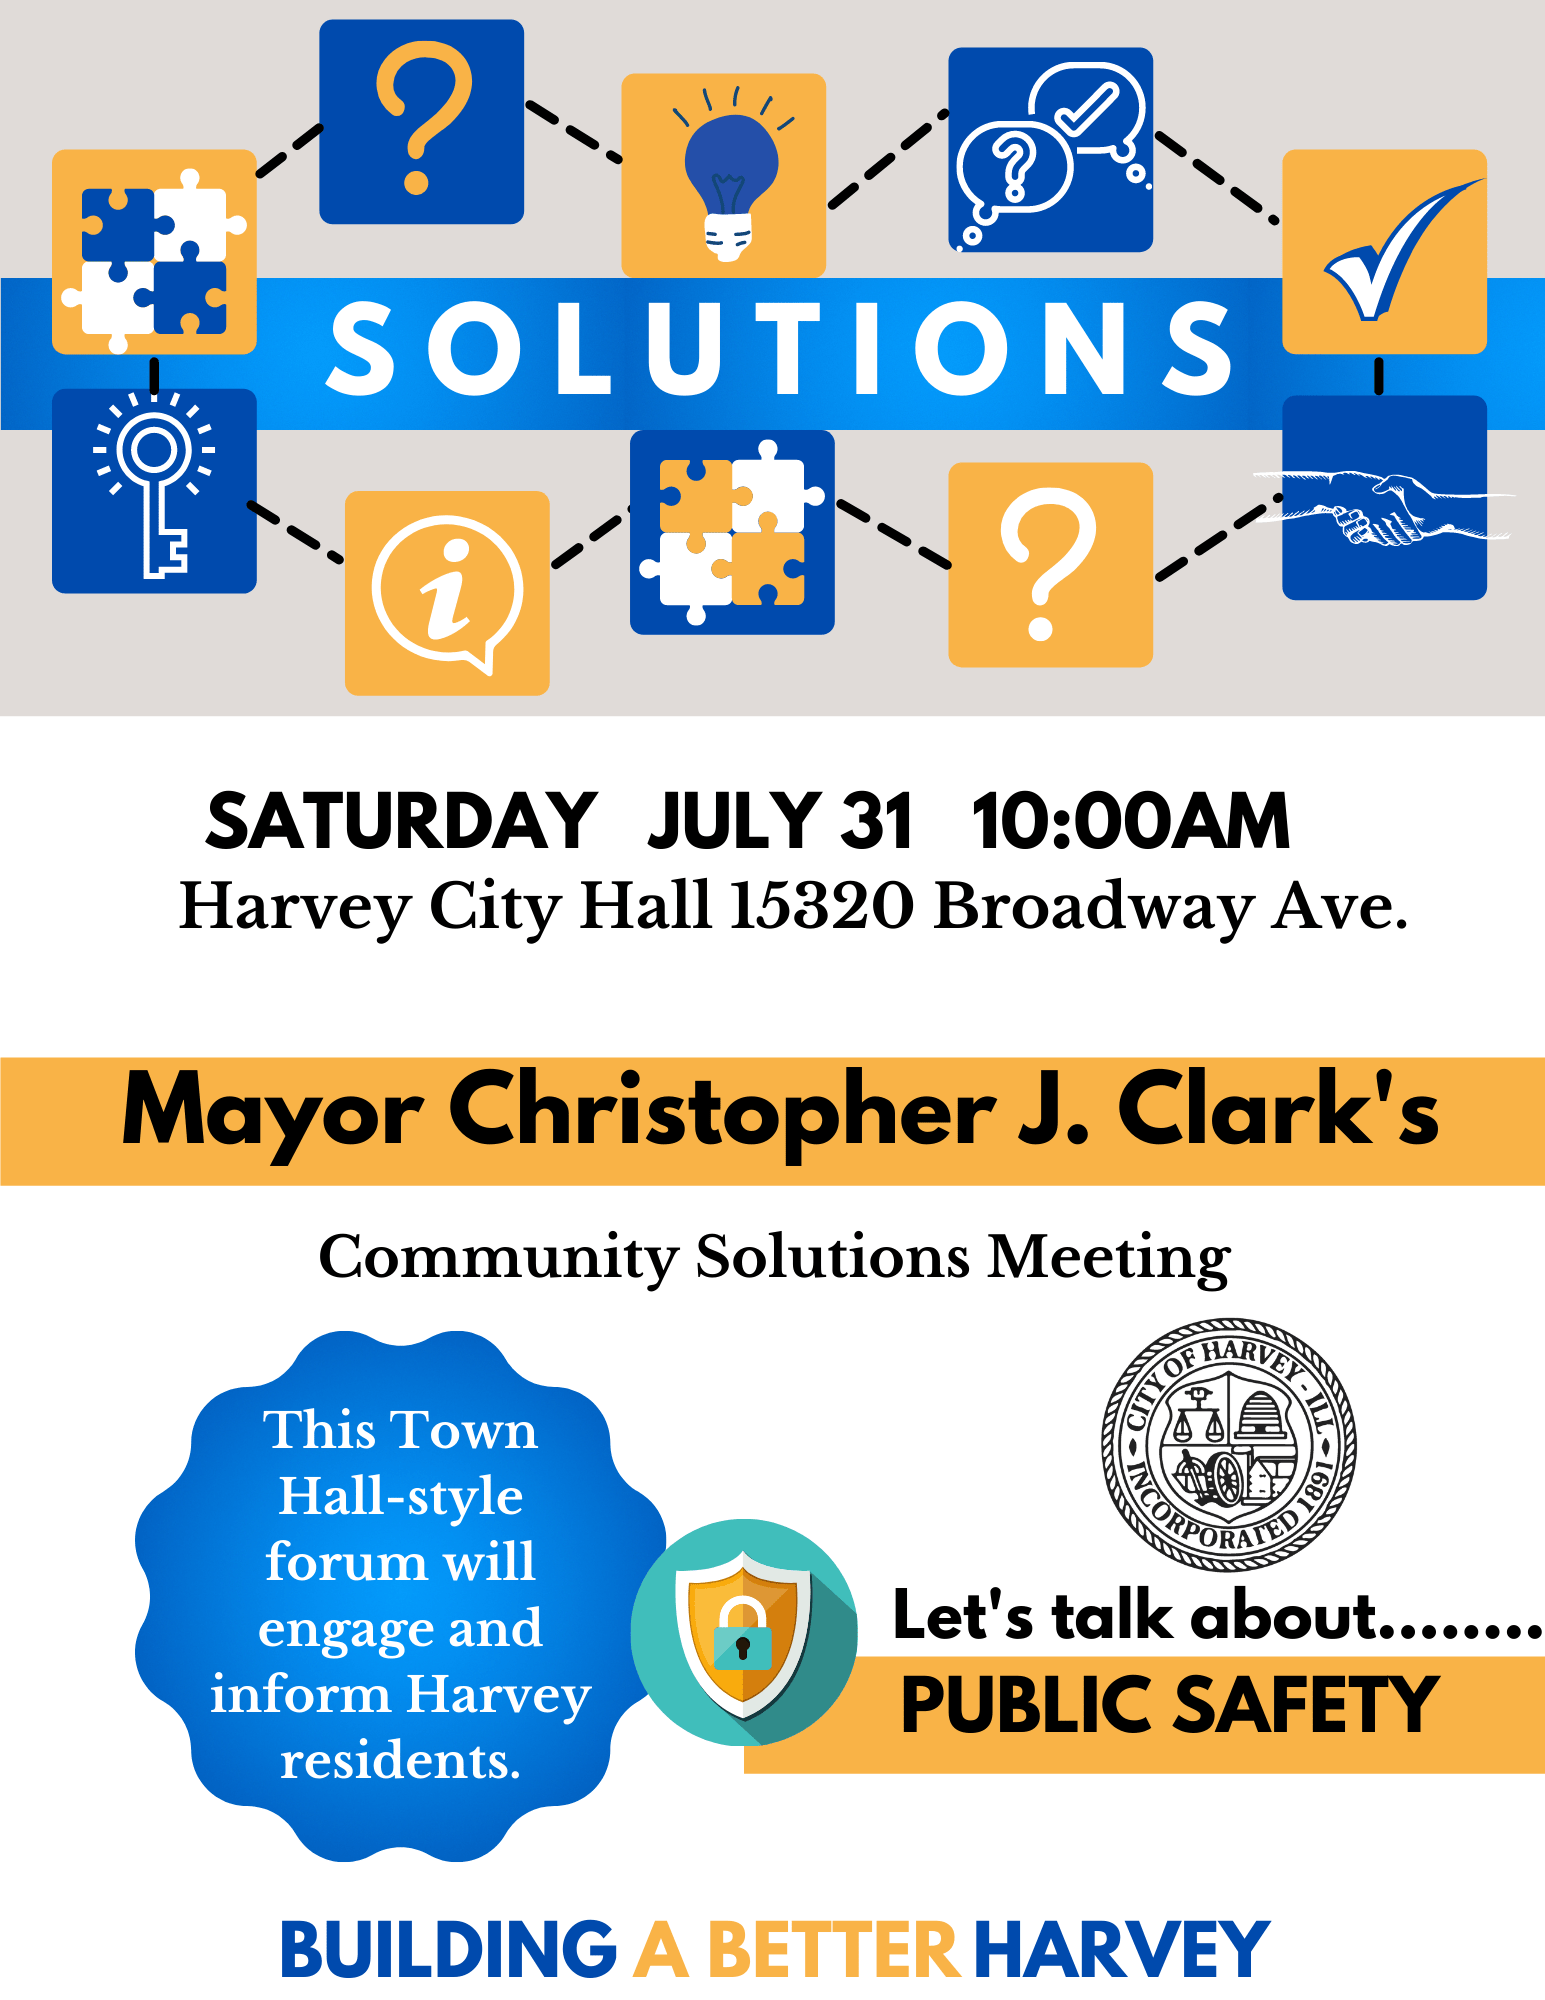 Community Solutions Meeting